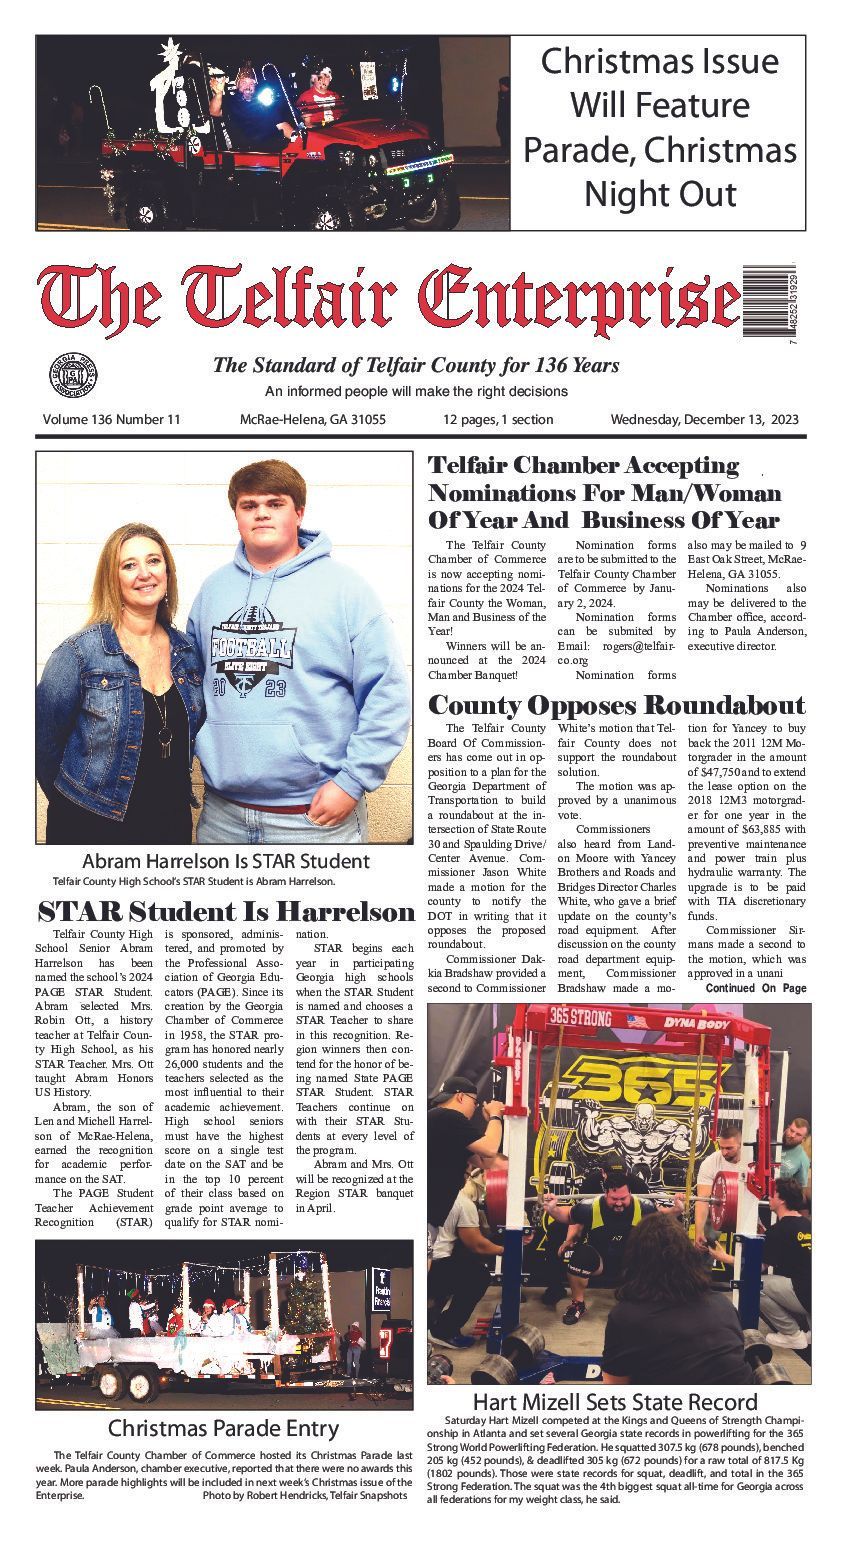 the front page of the tellair enterprise newspaper